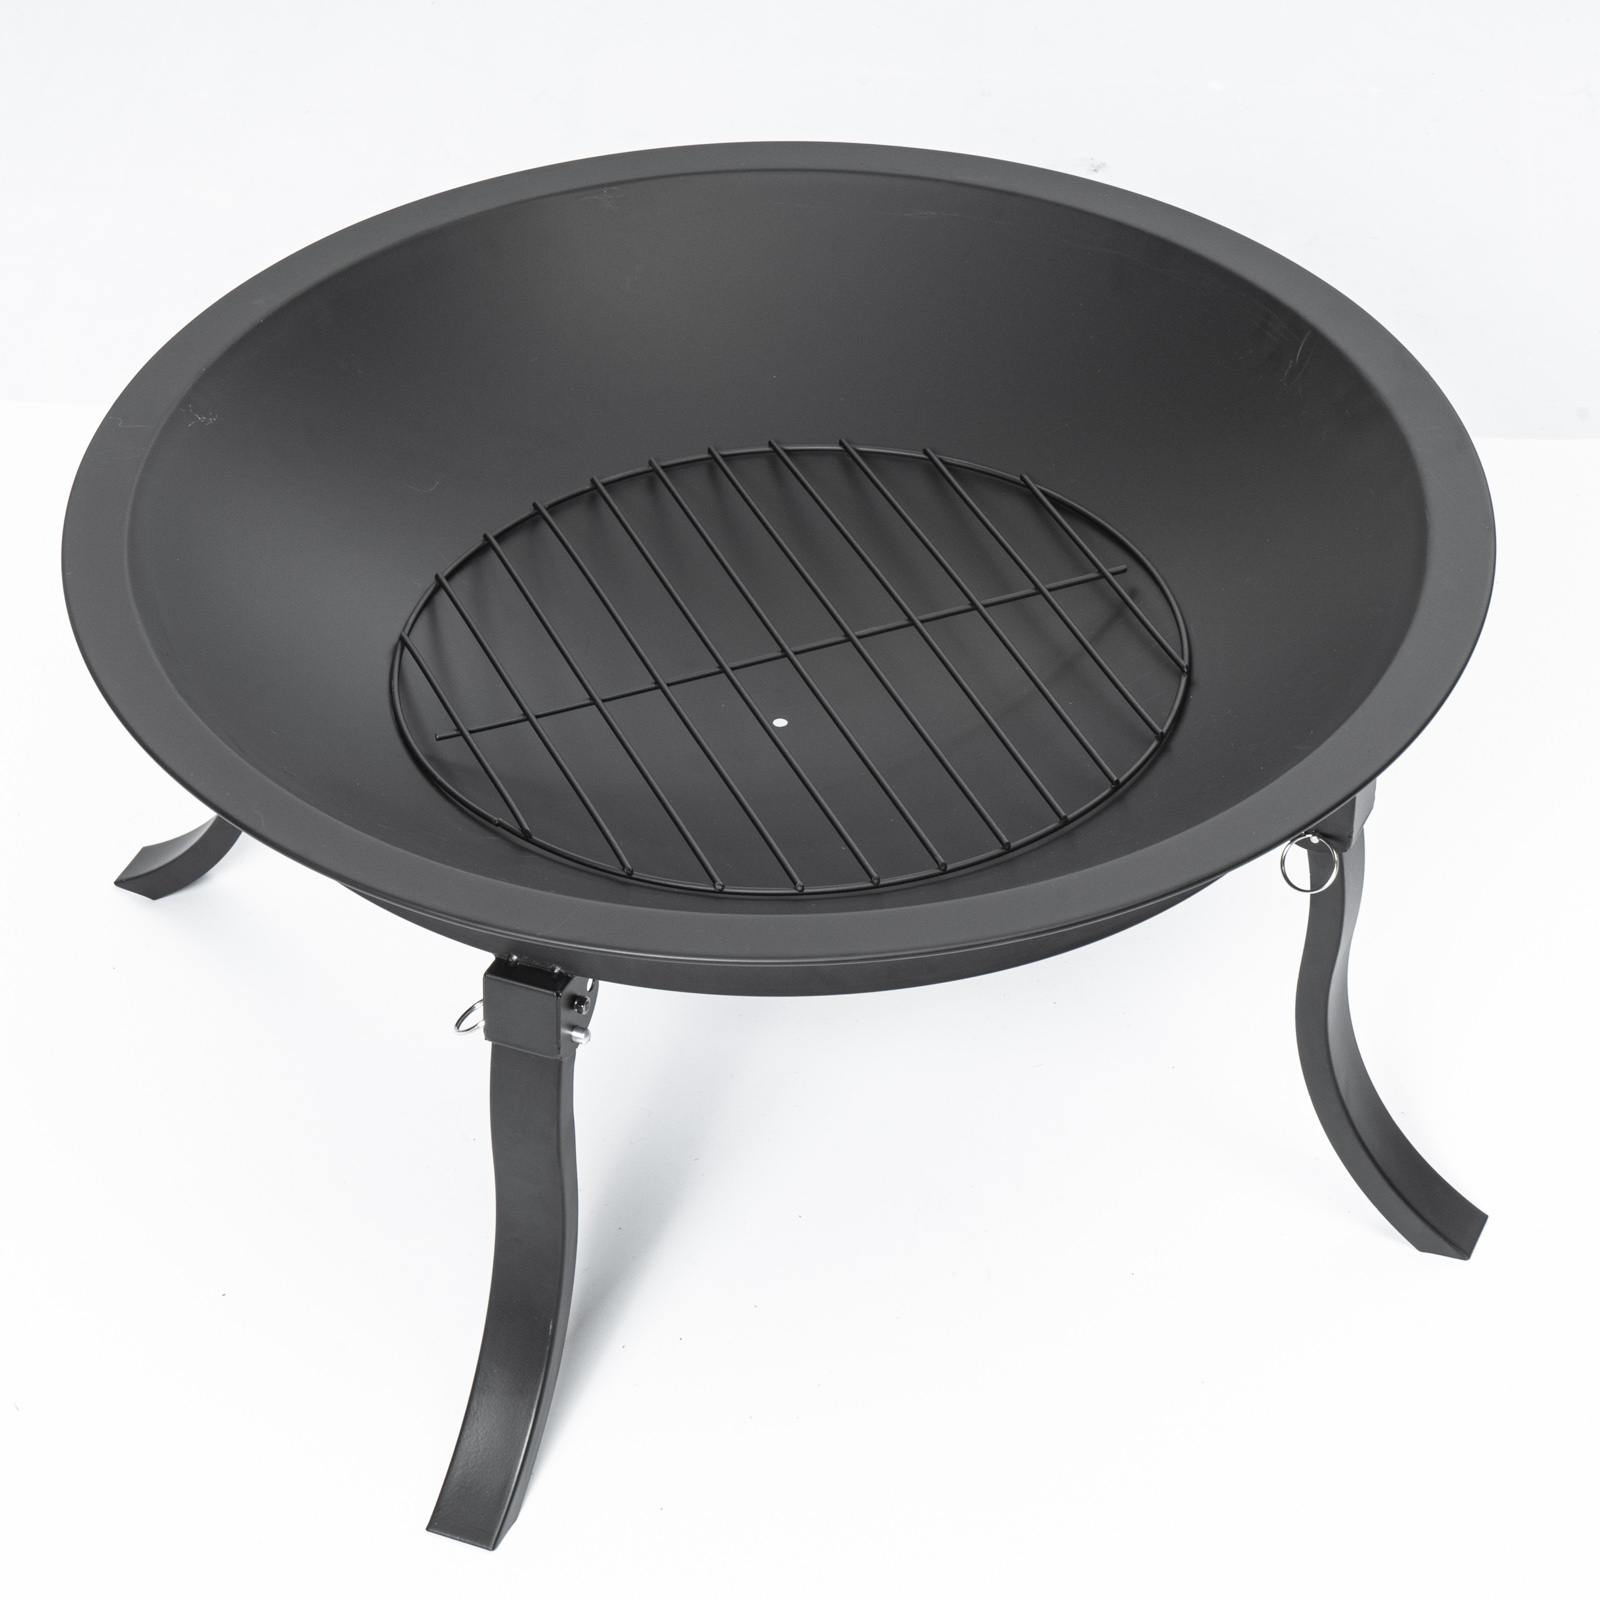 KingSo-24inch-Portable-Fire-Pits-Steel-Wood-Burning-Firepit--with-BBQ-Grill-Fire-Bowl-Poker-1886879-6